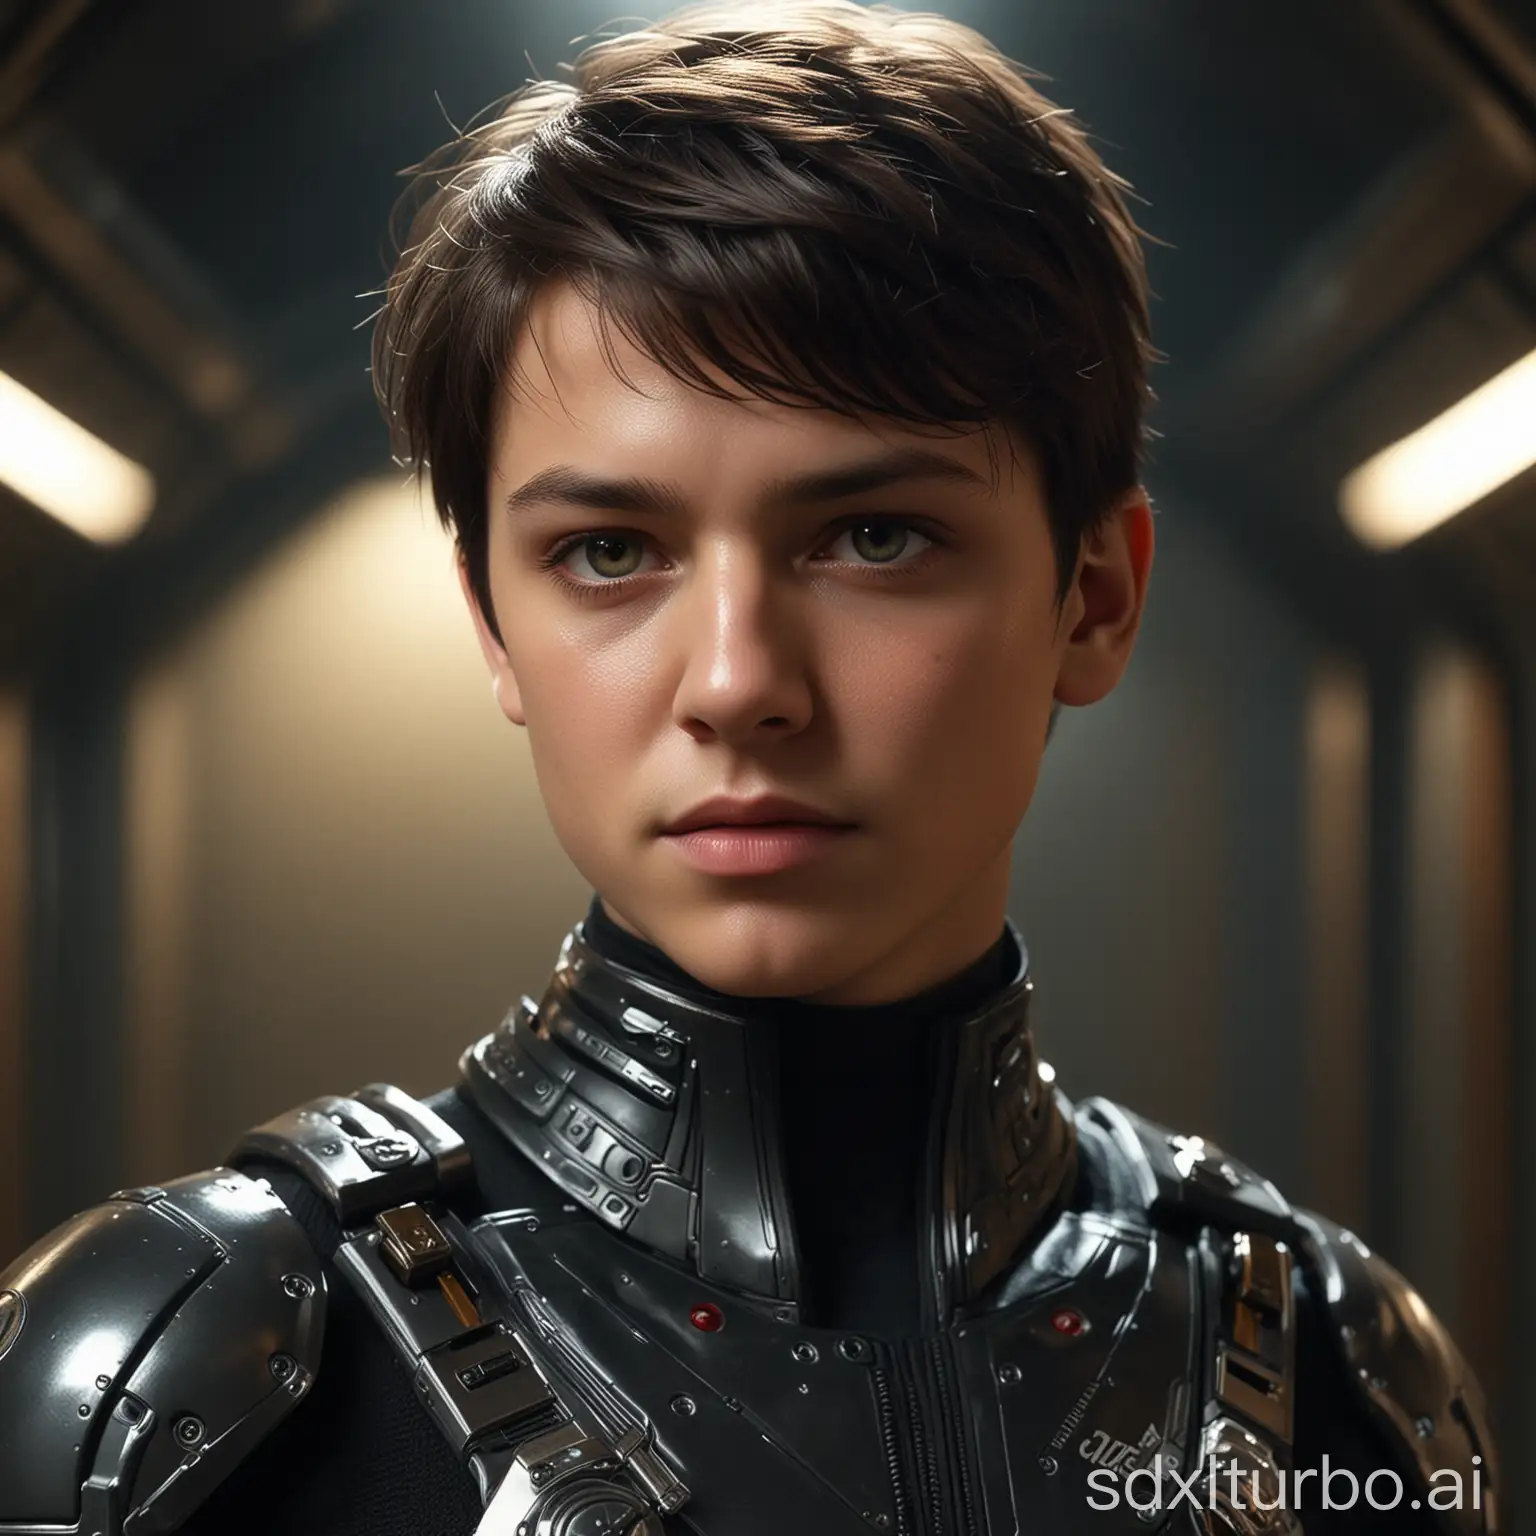 Stunning-Young-Boy-in-Detailed-SciFi-Engineering-Suit-on-Battlestar-Galactica-Style-Spaceship-Interior